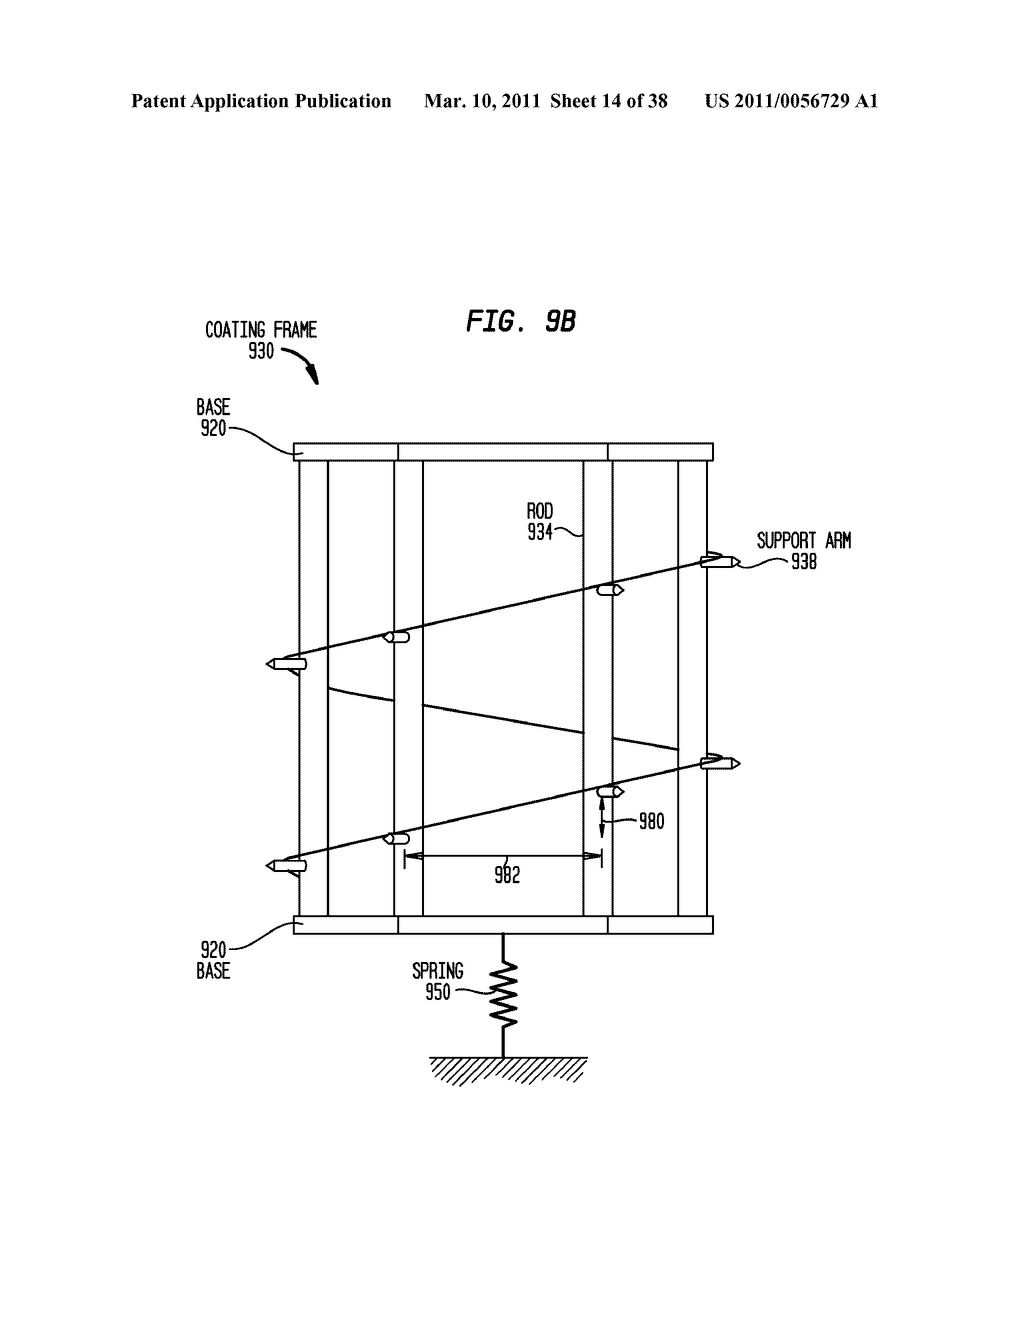 INSULATED CONDUCTIVE ELEMENT HAVING A SUBSTANTIALLY CONTINUOUS BARRIER LAYER FORMED THROUGH CONTINUOUS VAPOR DEPOSITION - diagram, schematic, and image 15